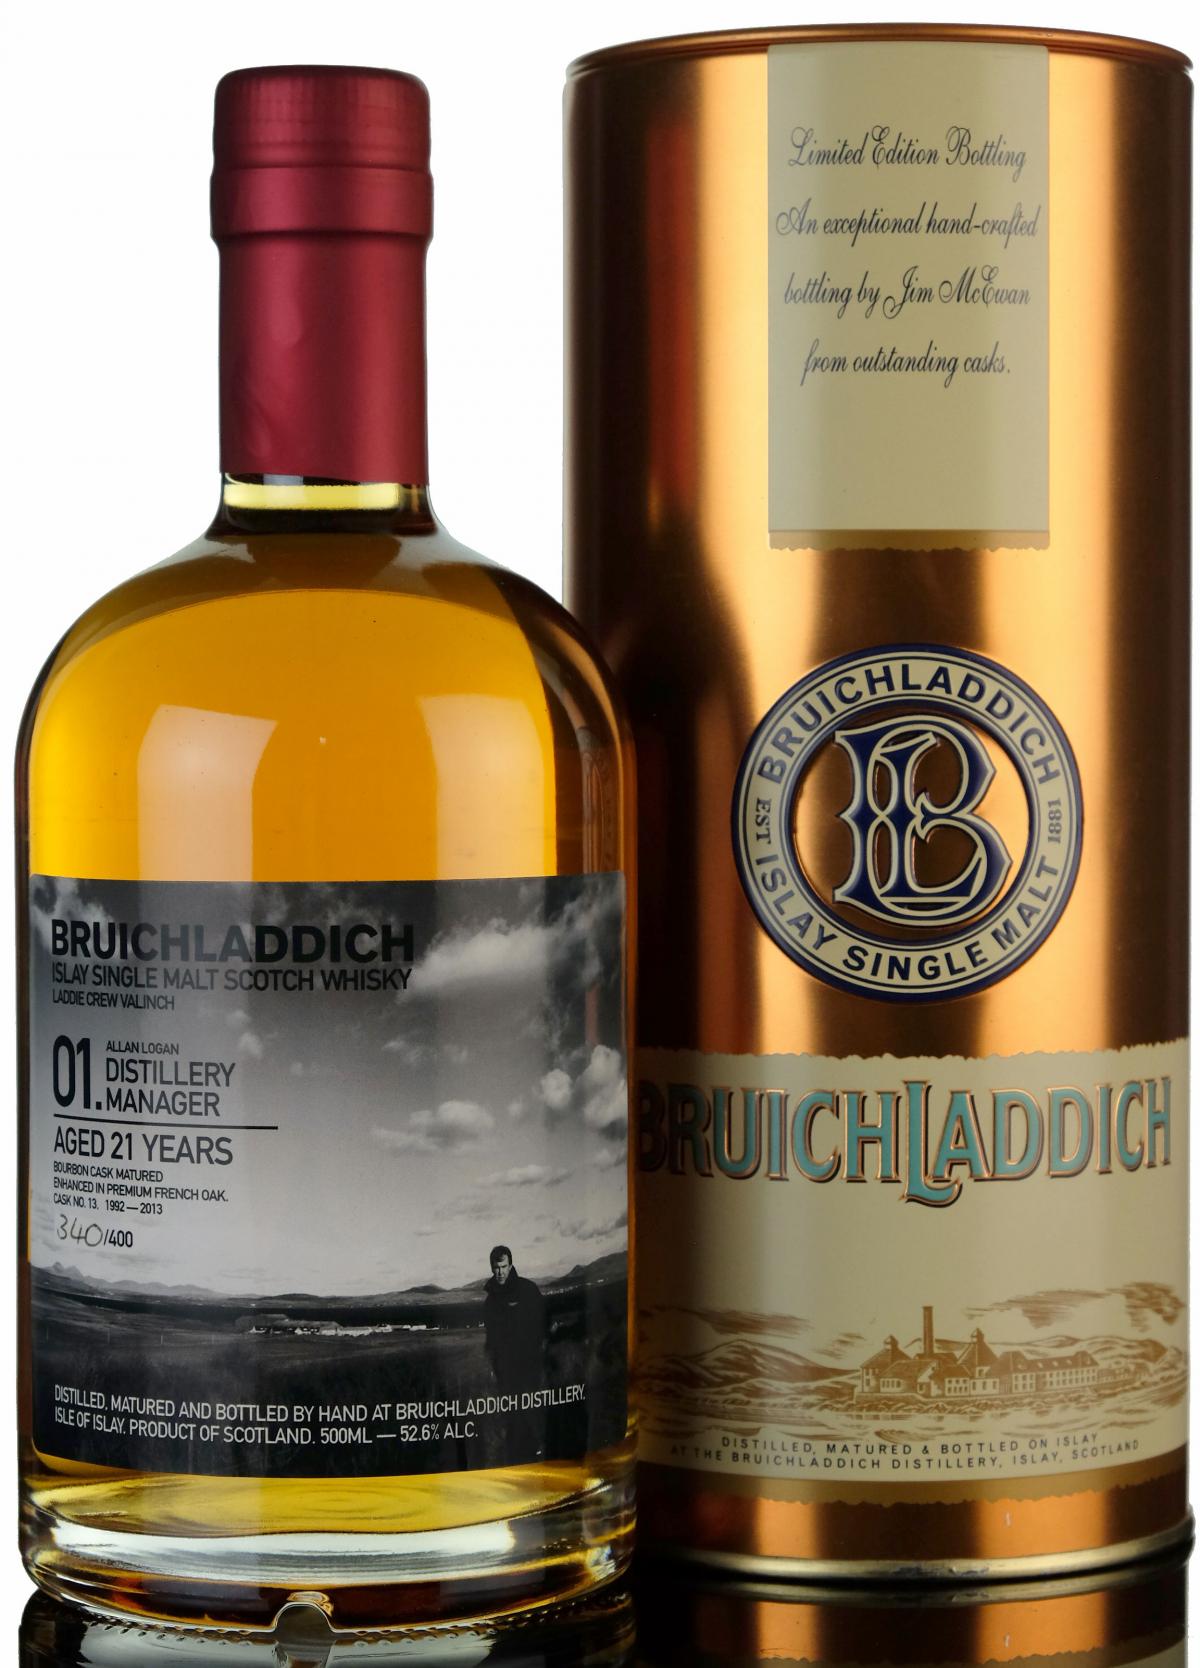 Bruichladdich 1992 - Valinch - Managers Choice